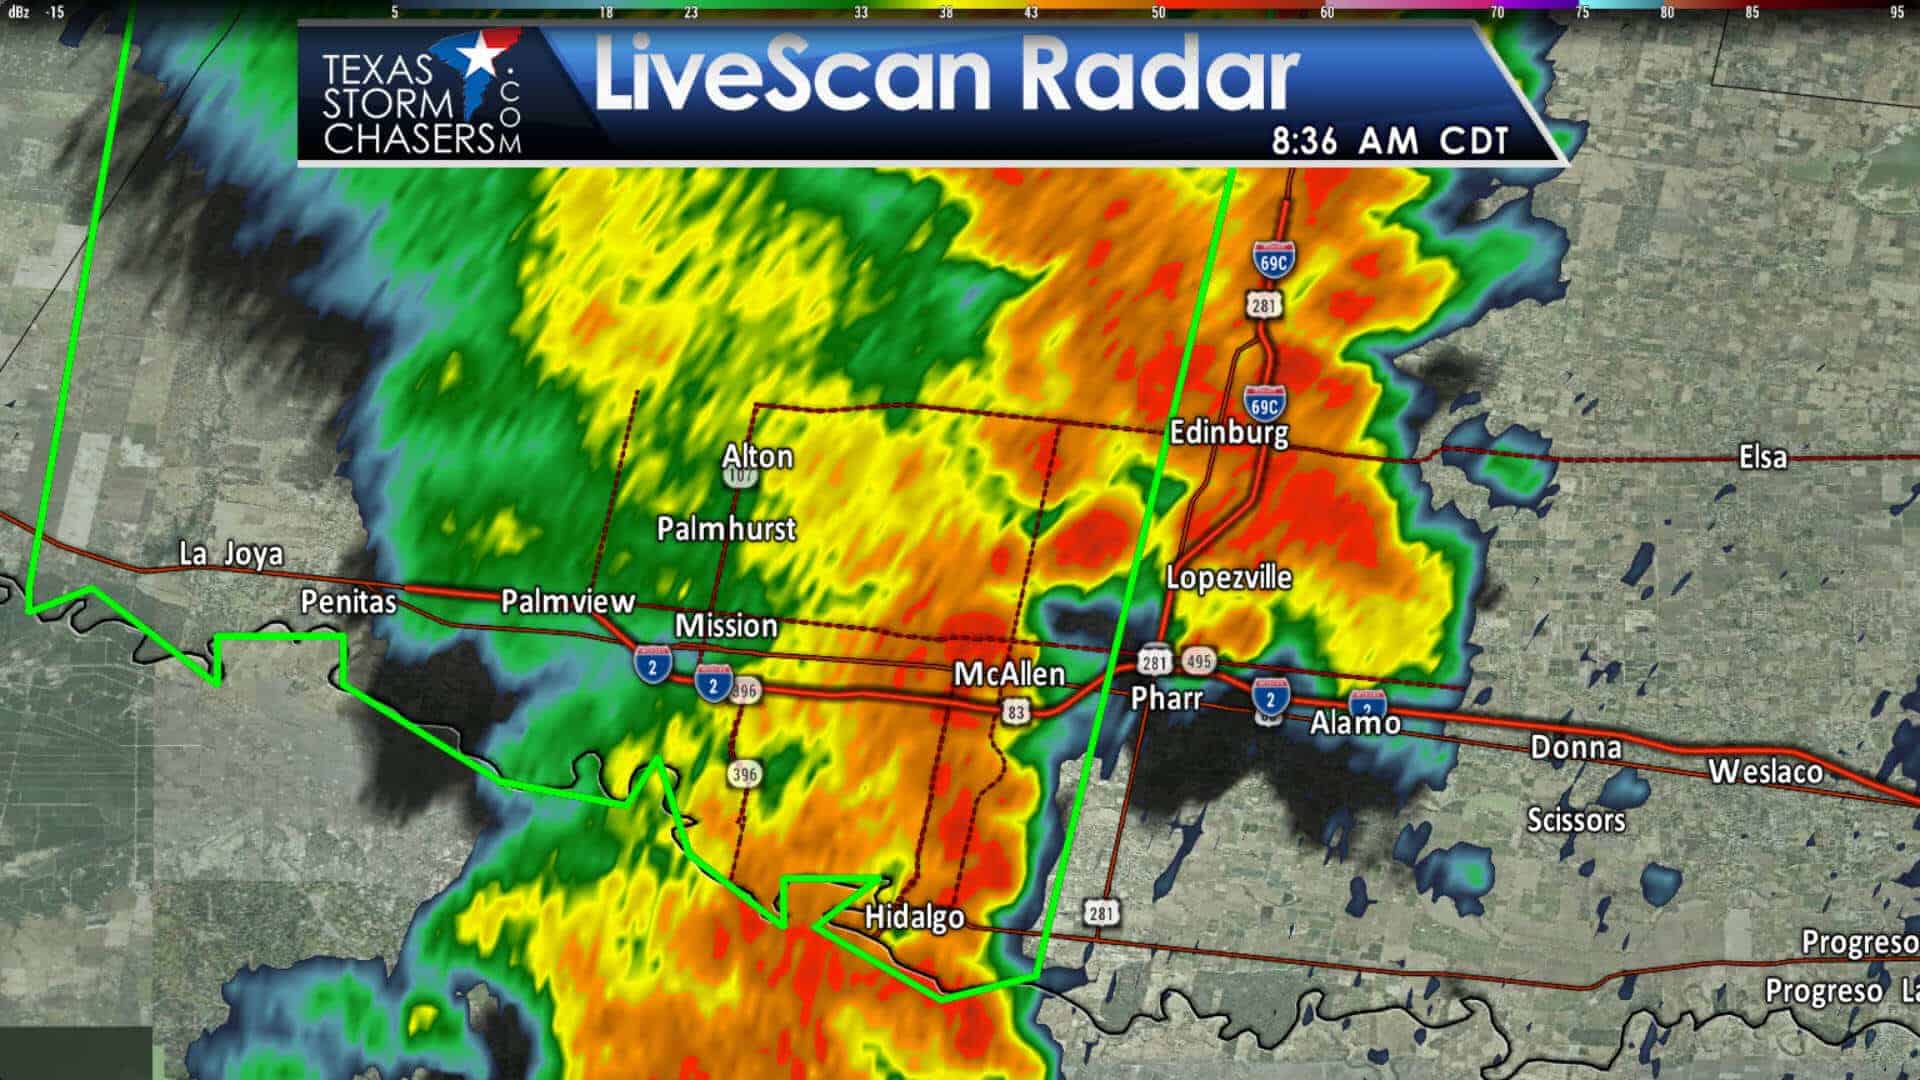 Flash Flood Emergency for Alton, Mission and McAllen